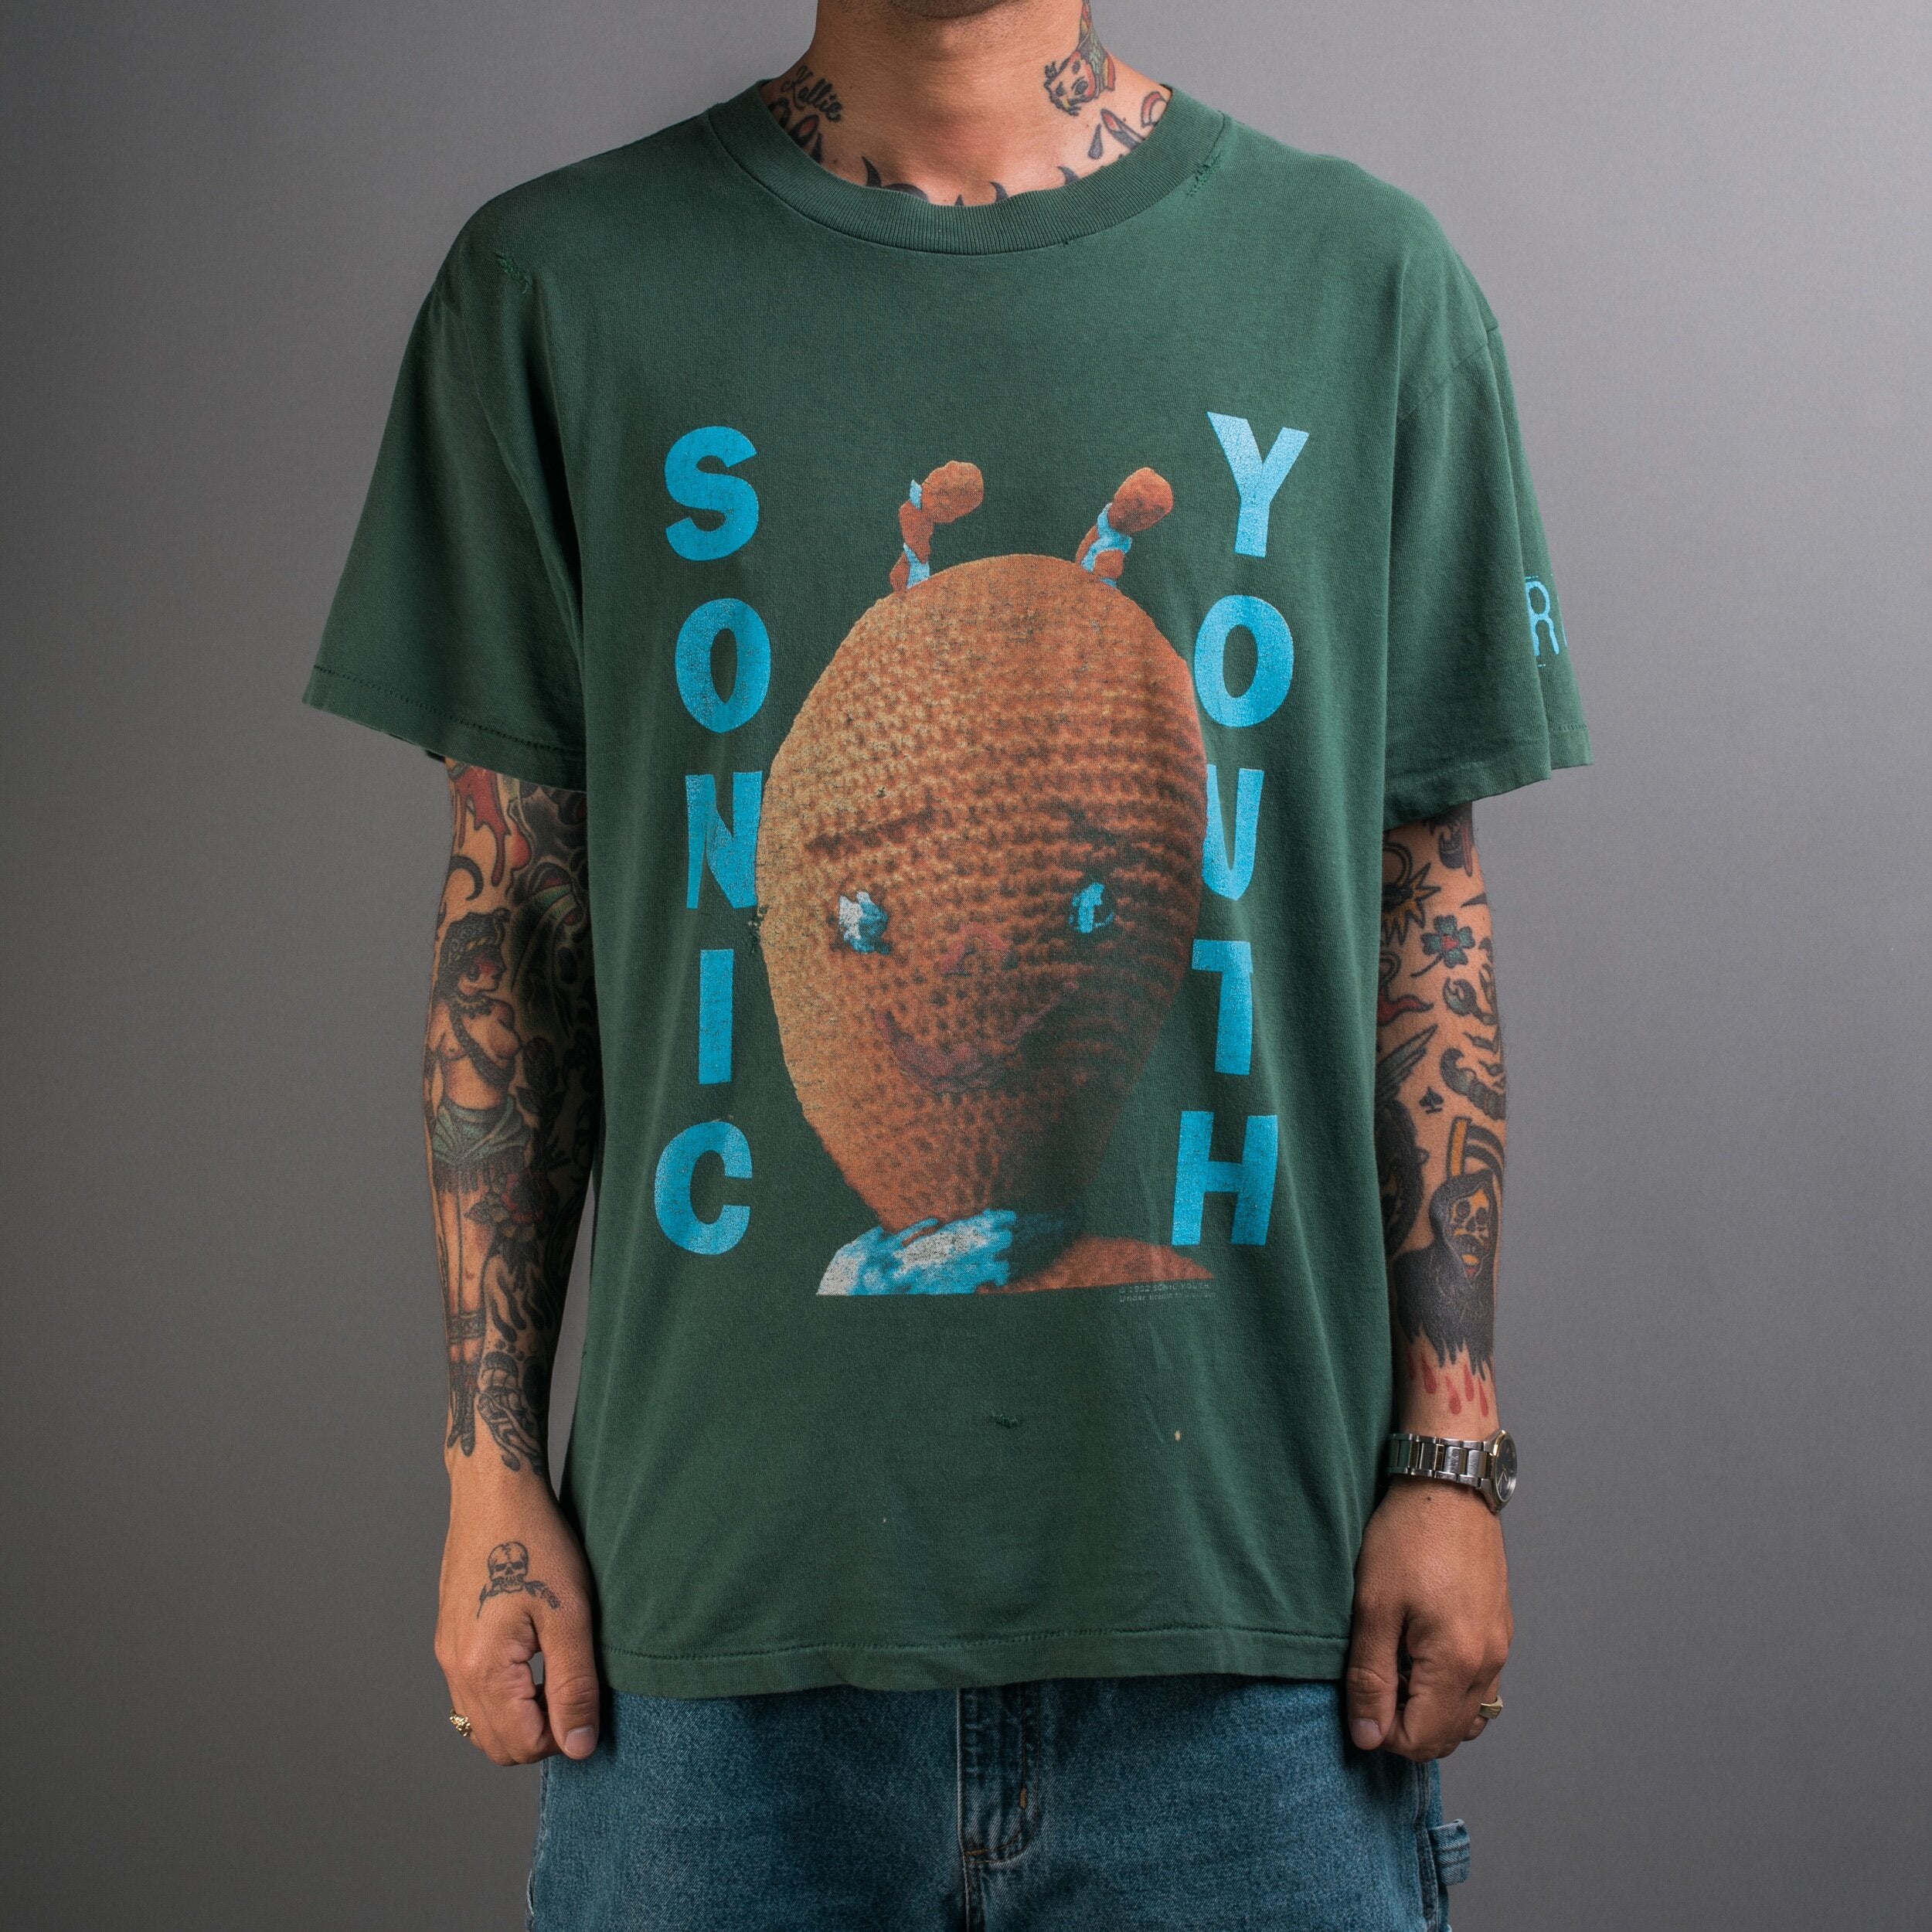 80s 90s バンド Tシャツ USA製 Band Tee SONIC YOUTH T Shirt Made In